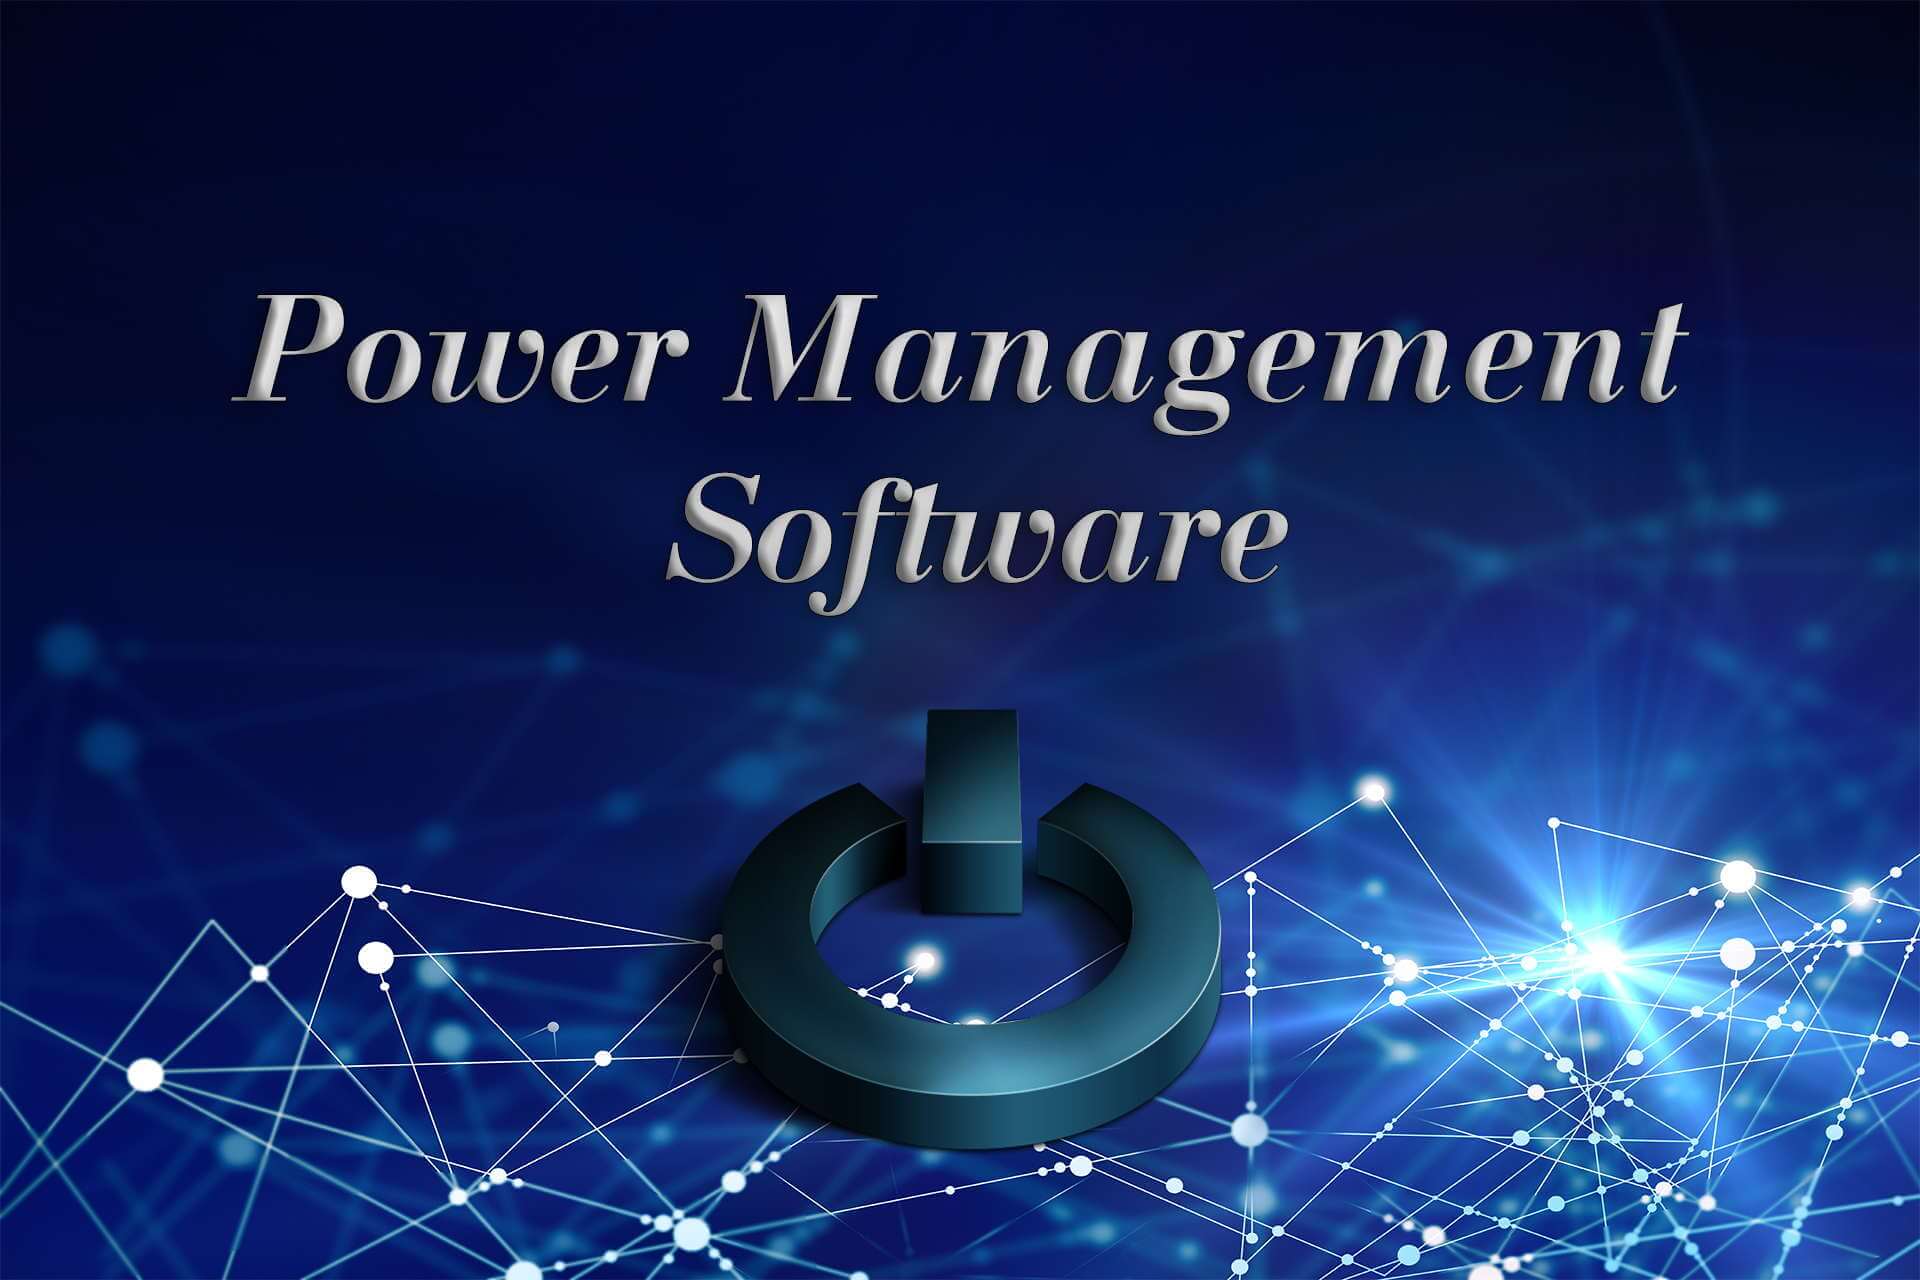 Power management software tools